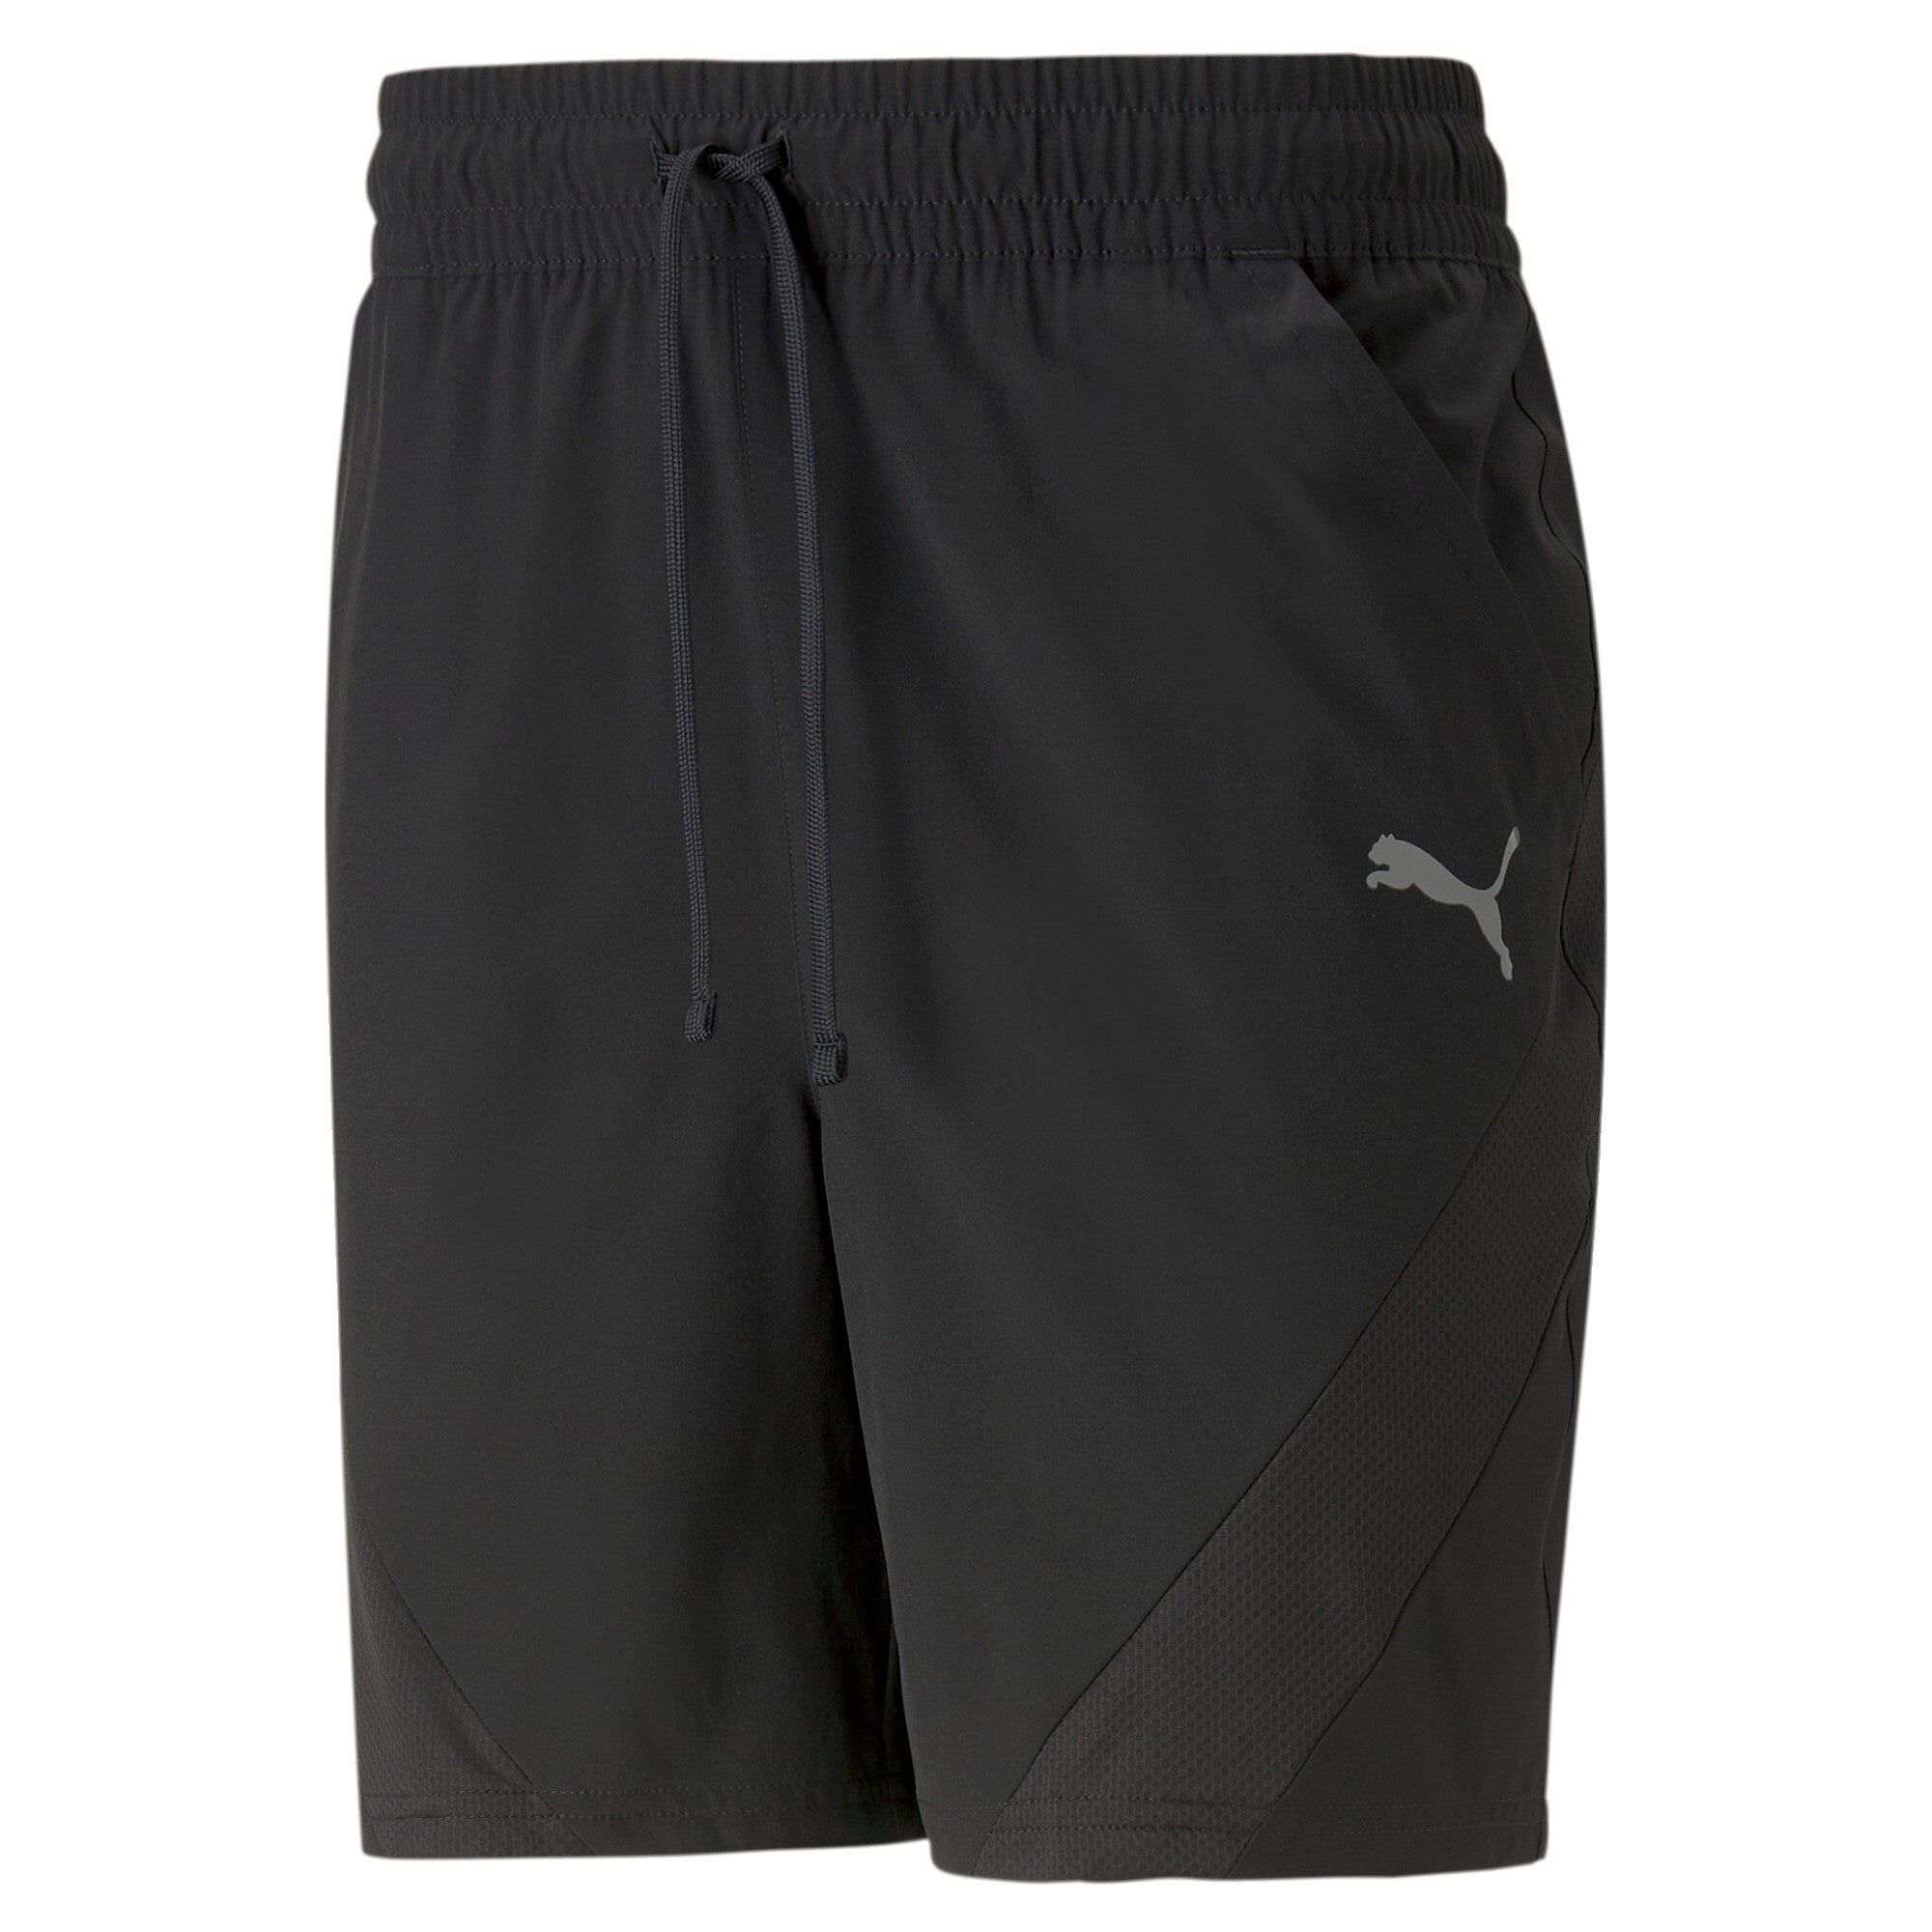 MENS FIT 7 STRETCH WOVEN SHORT - 52329401